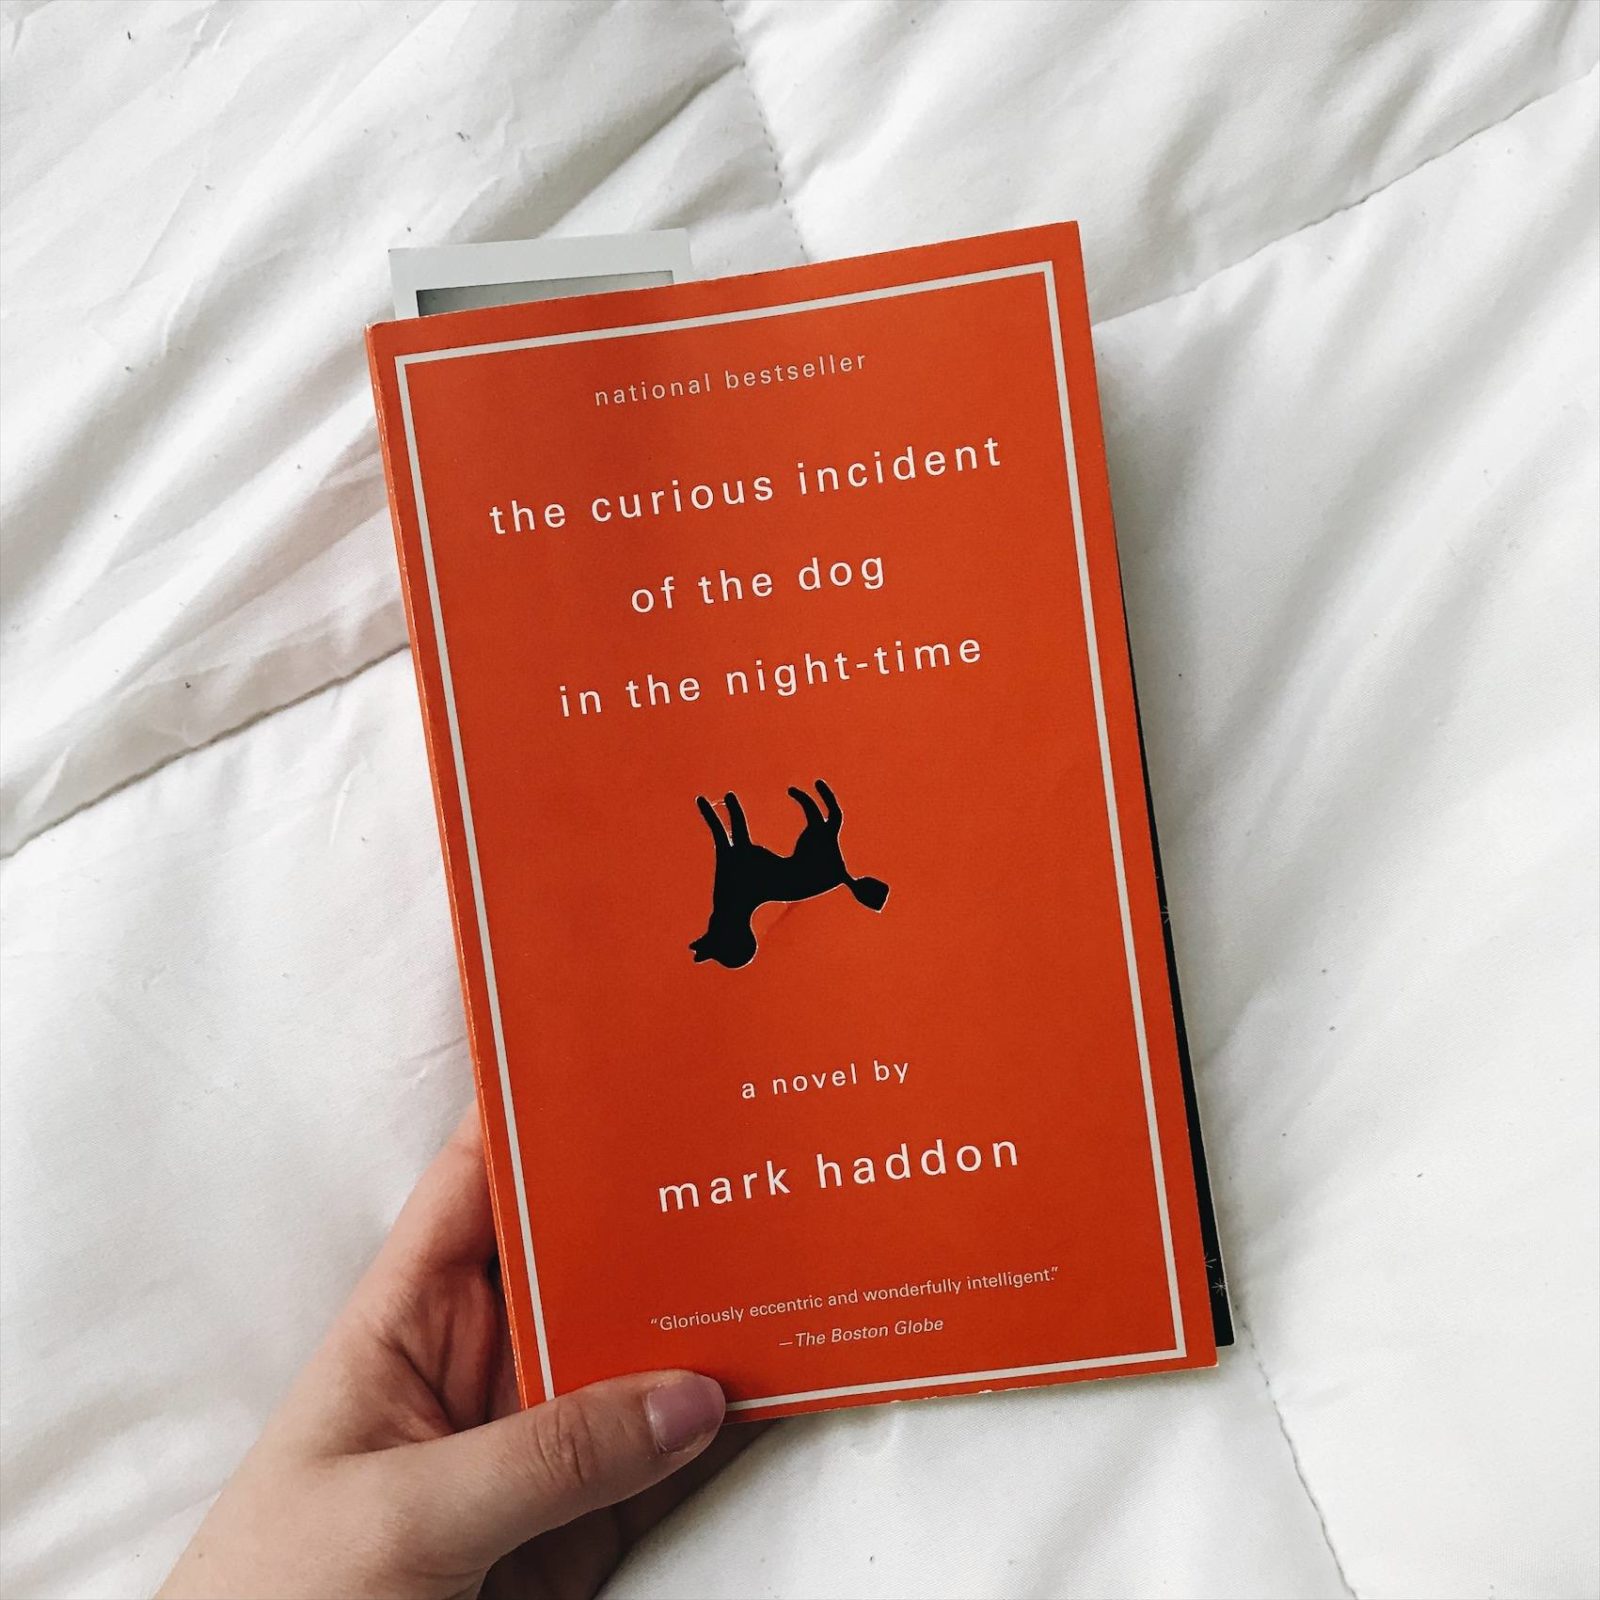 the curious incident of the dog in the night time